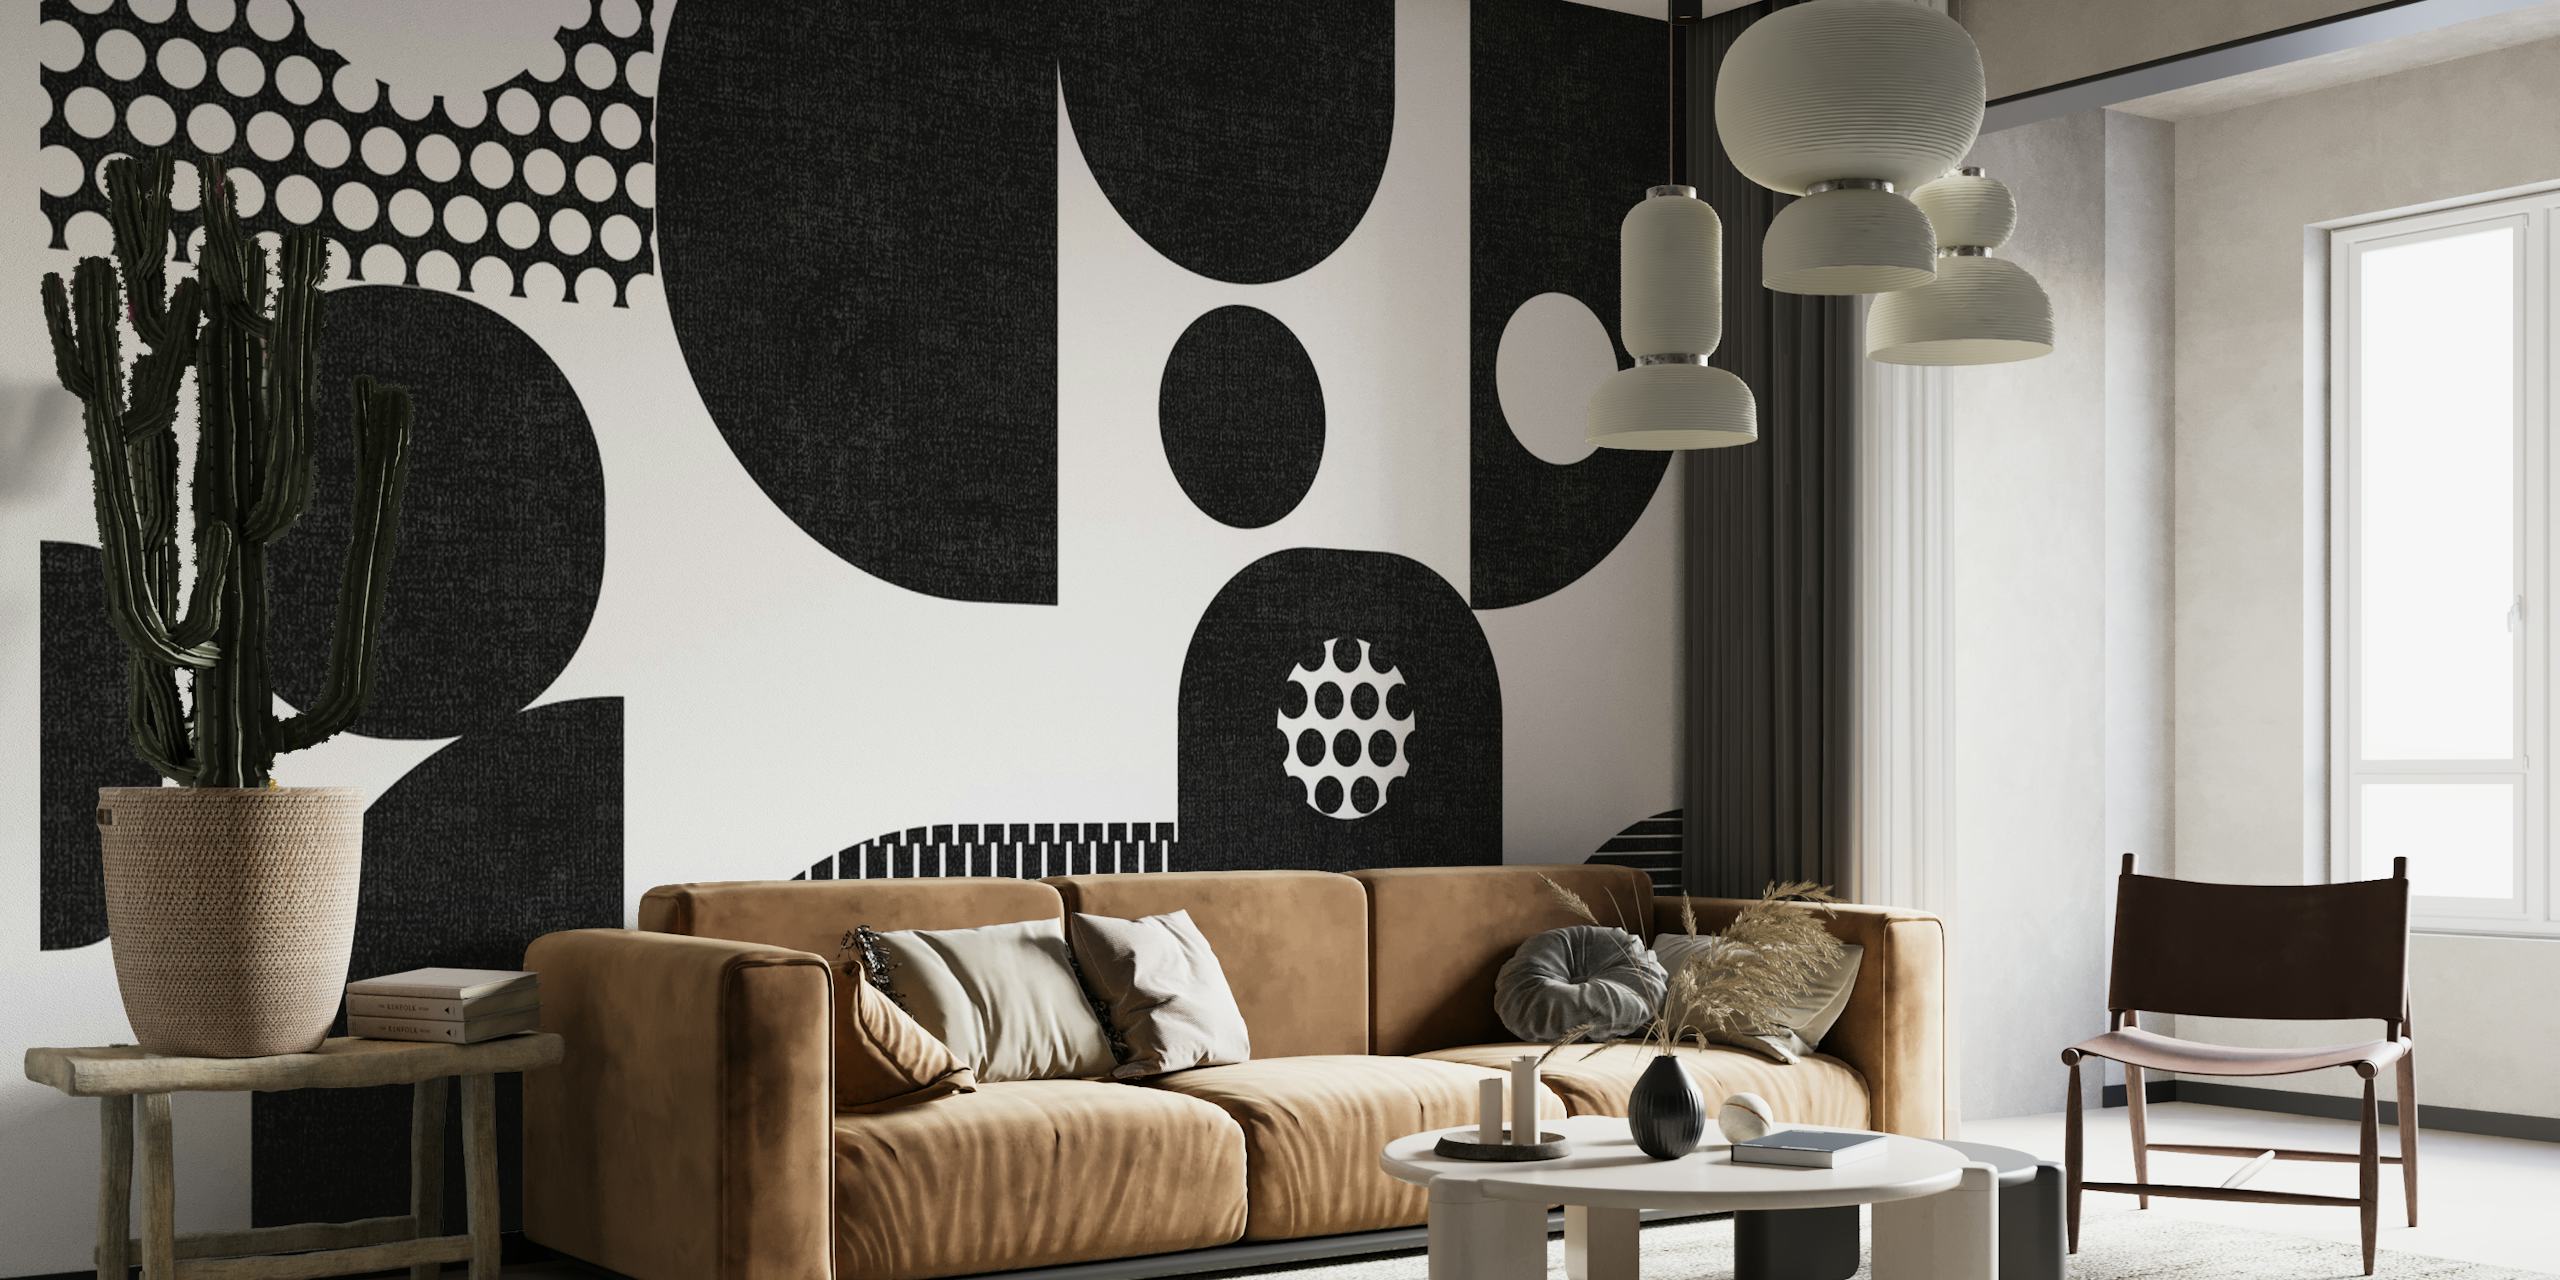 Monochrome geometric shapes wall mural with abstract black and white design